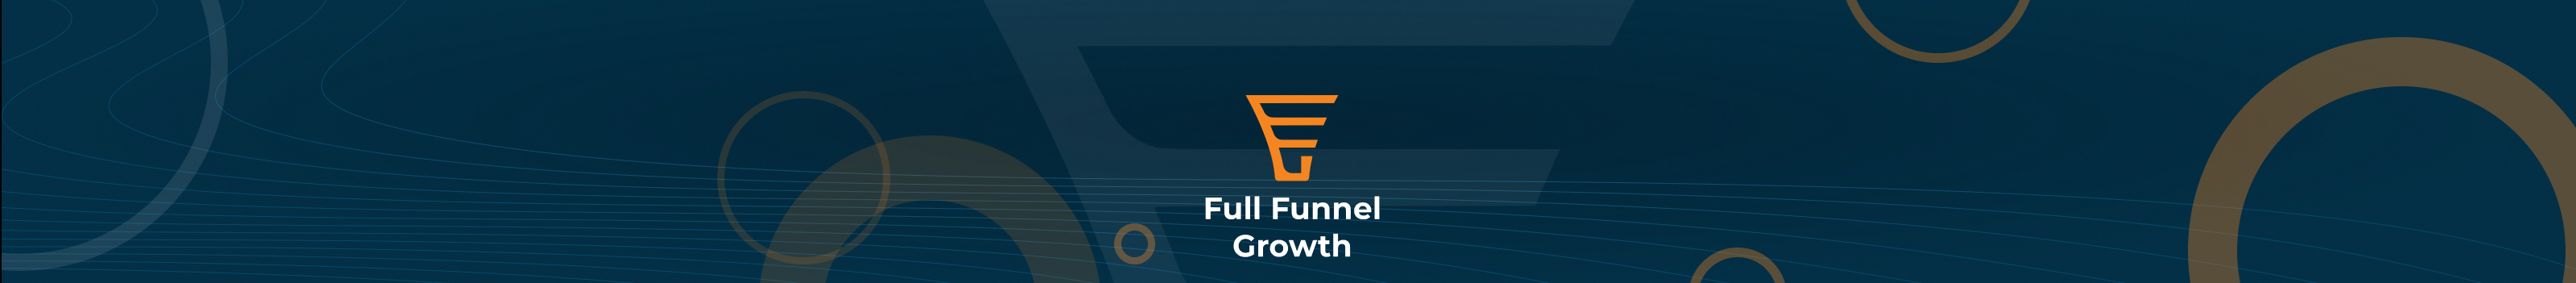 Full Funnel Growth's profile banner